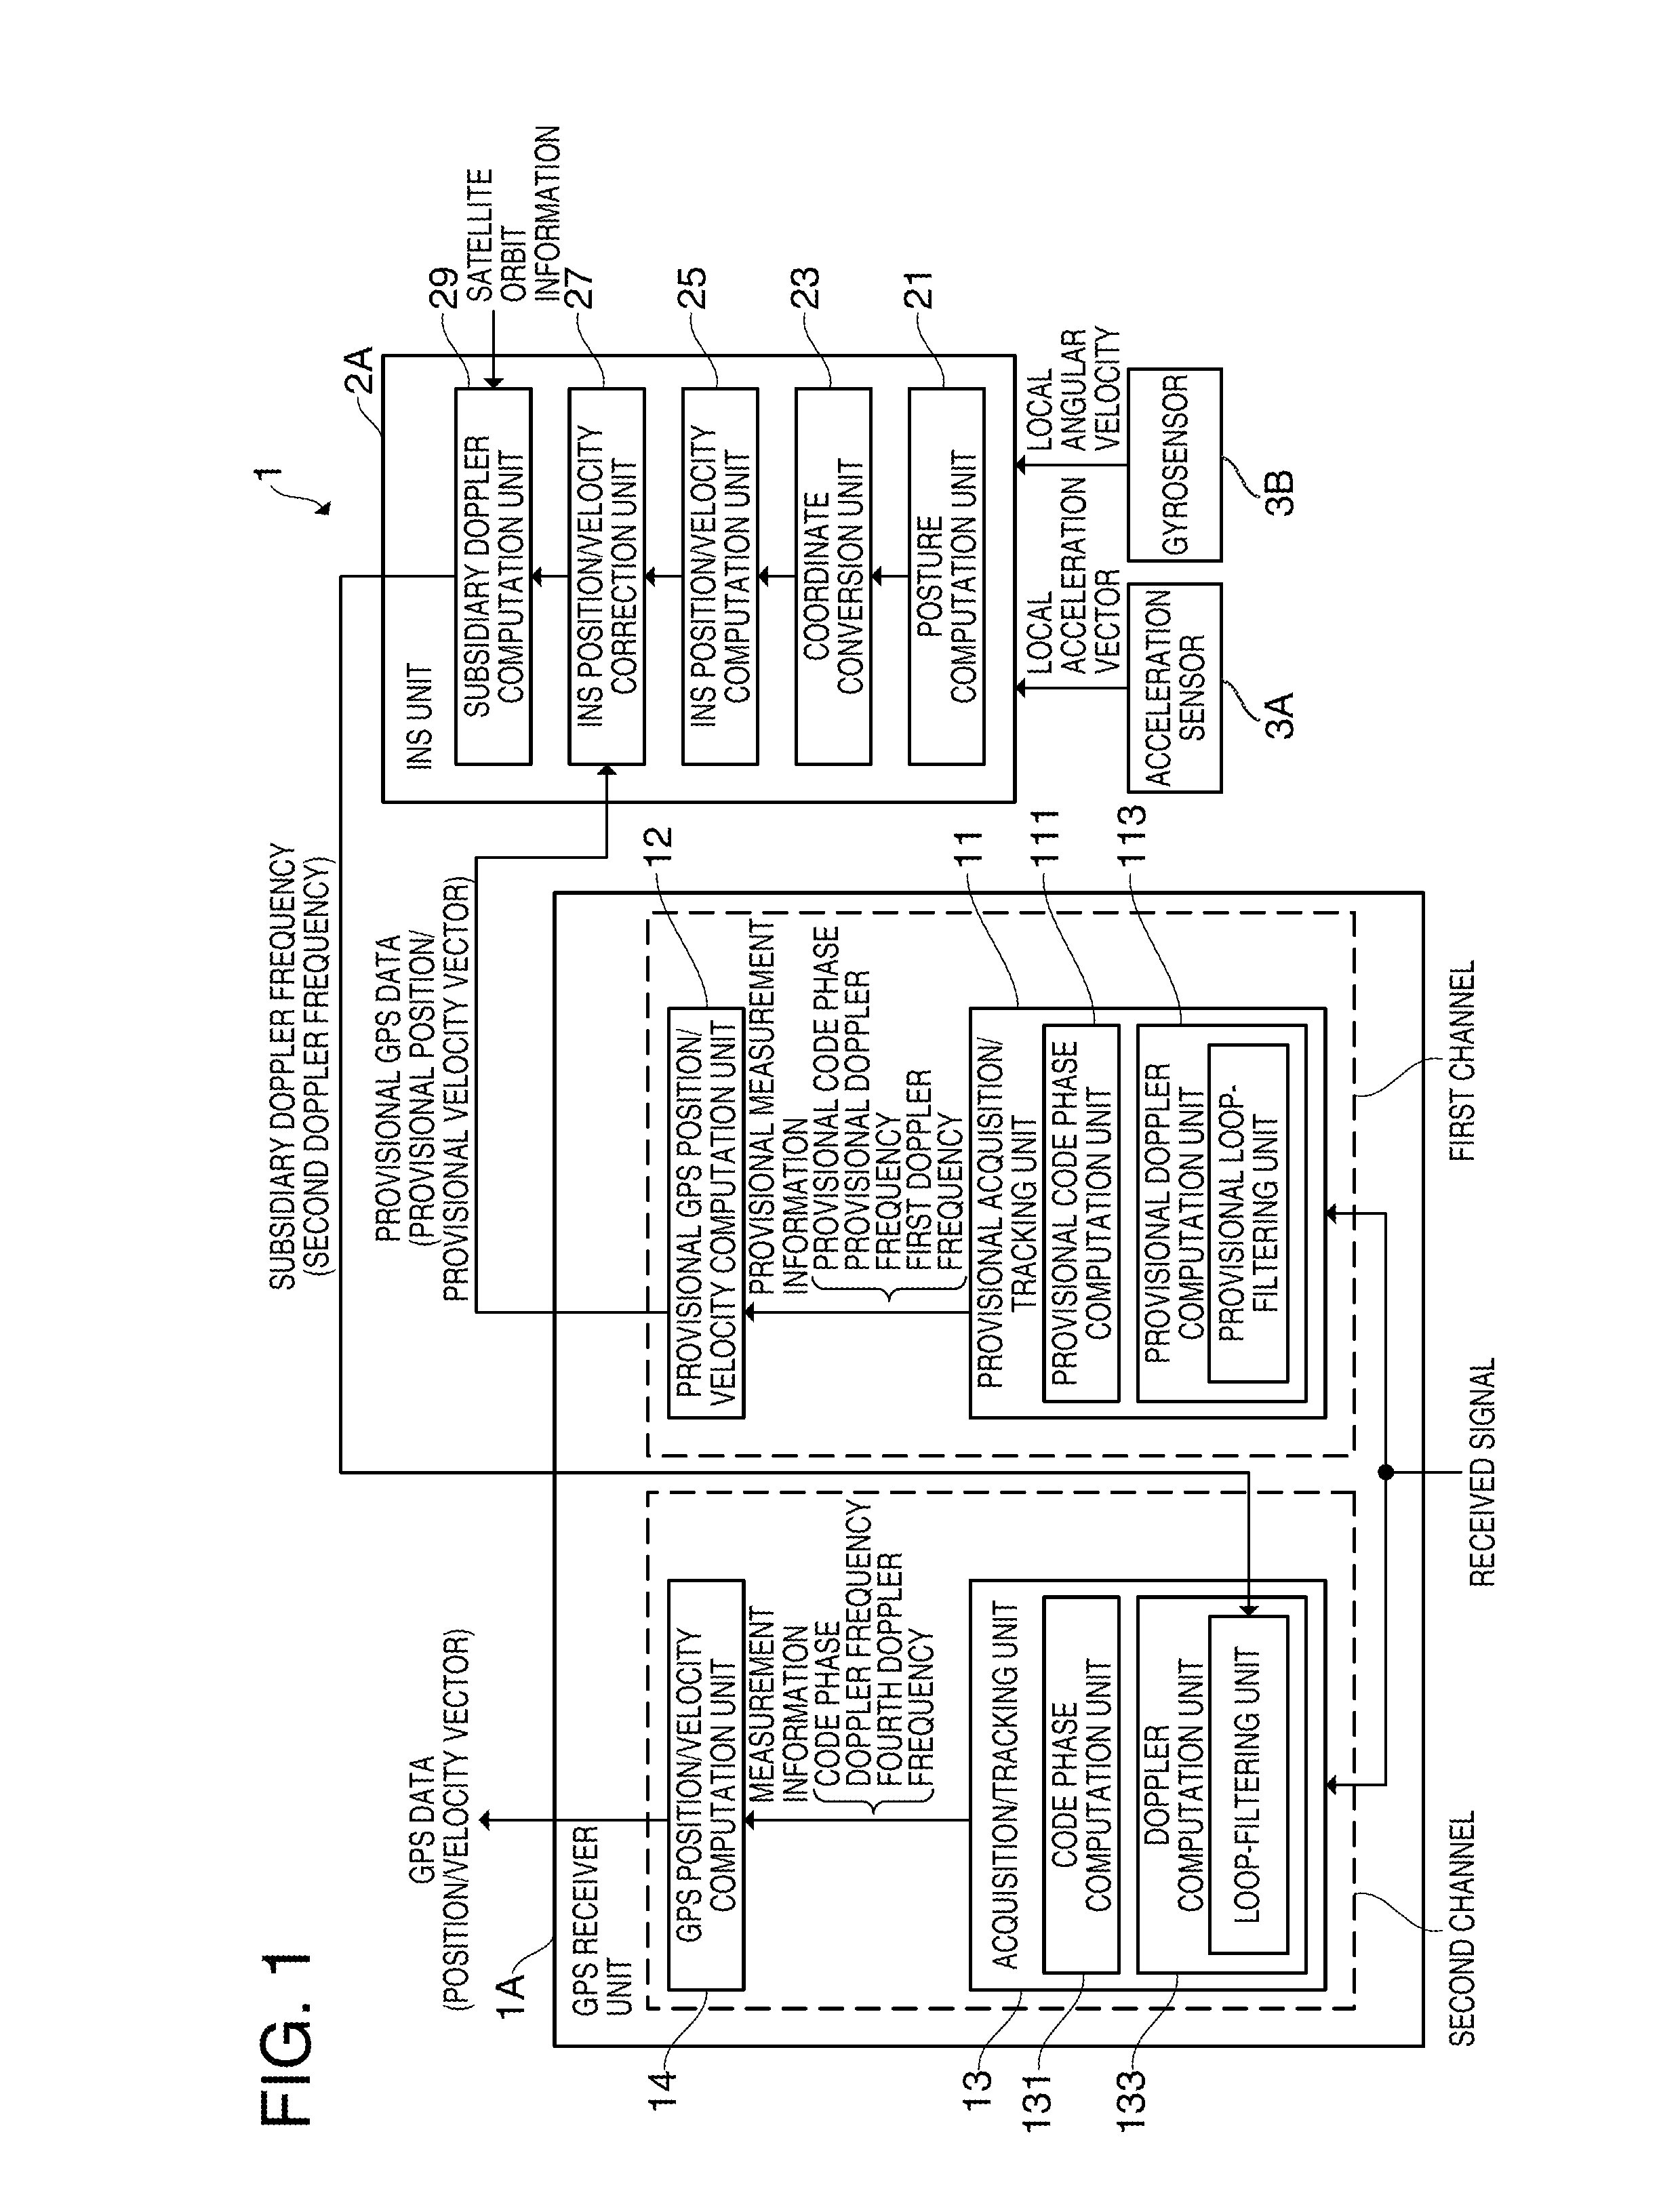 Satellite signal tracking method and receiver